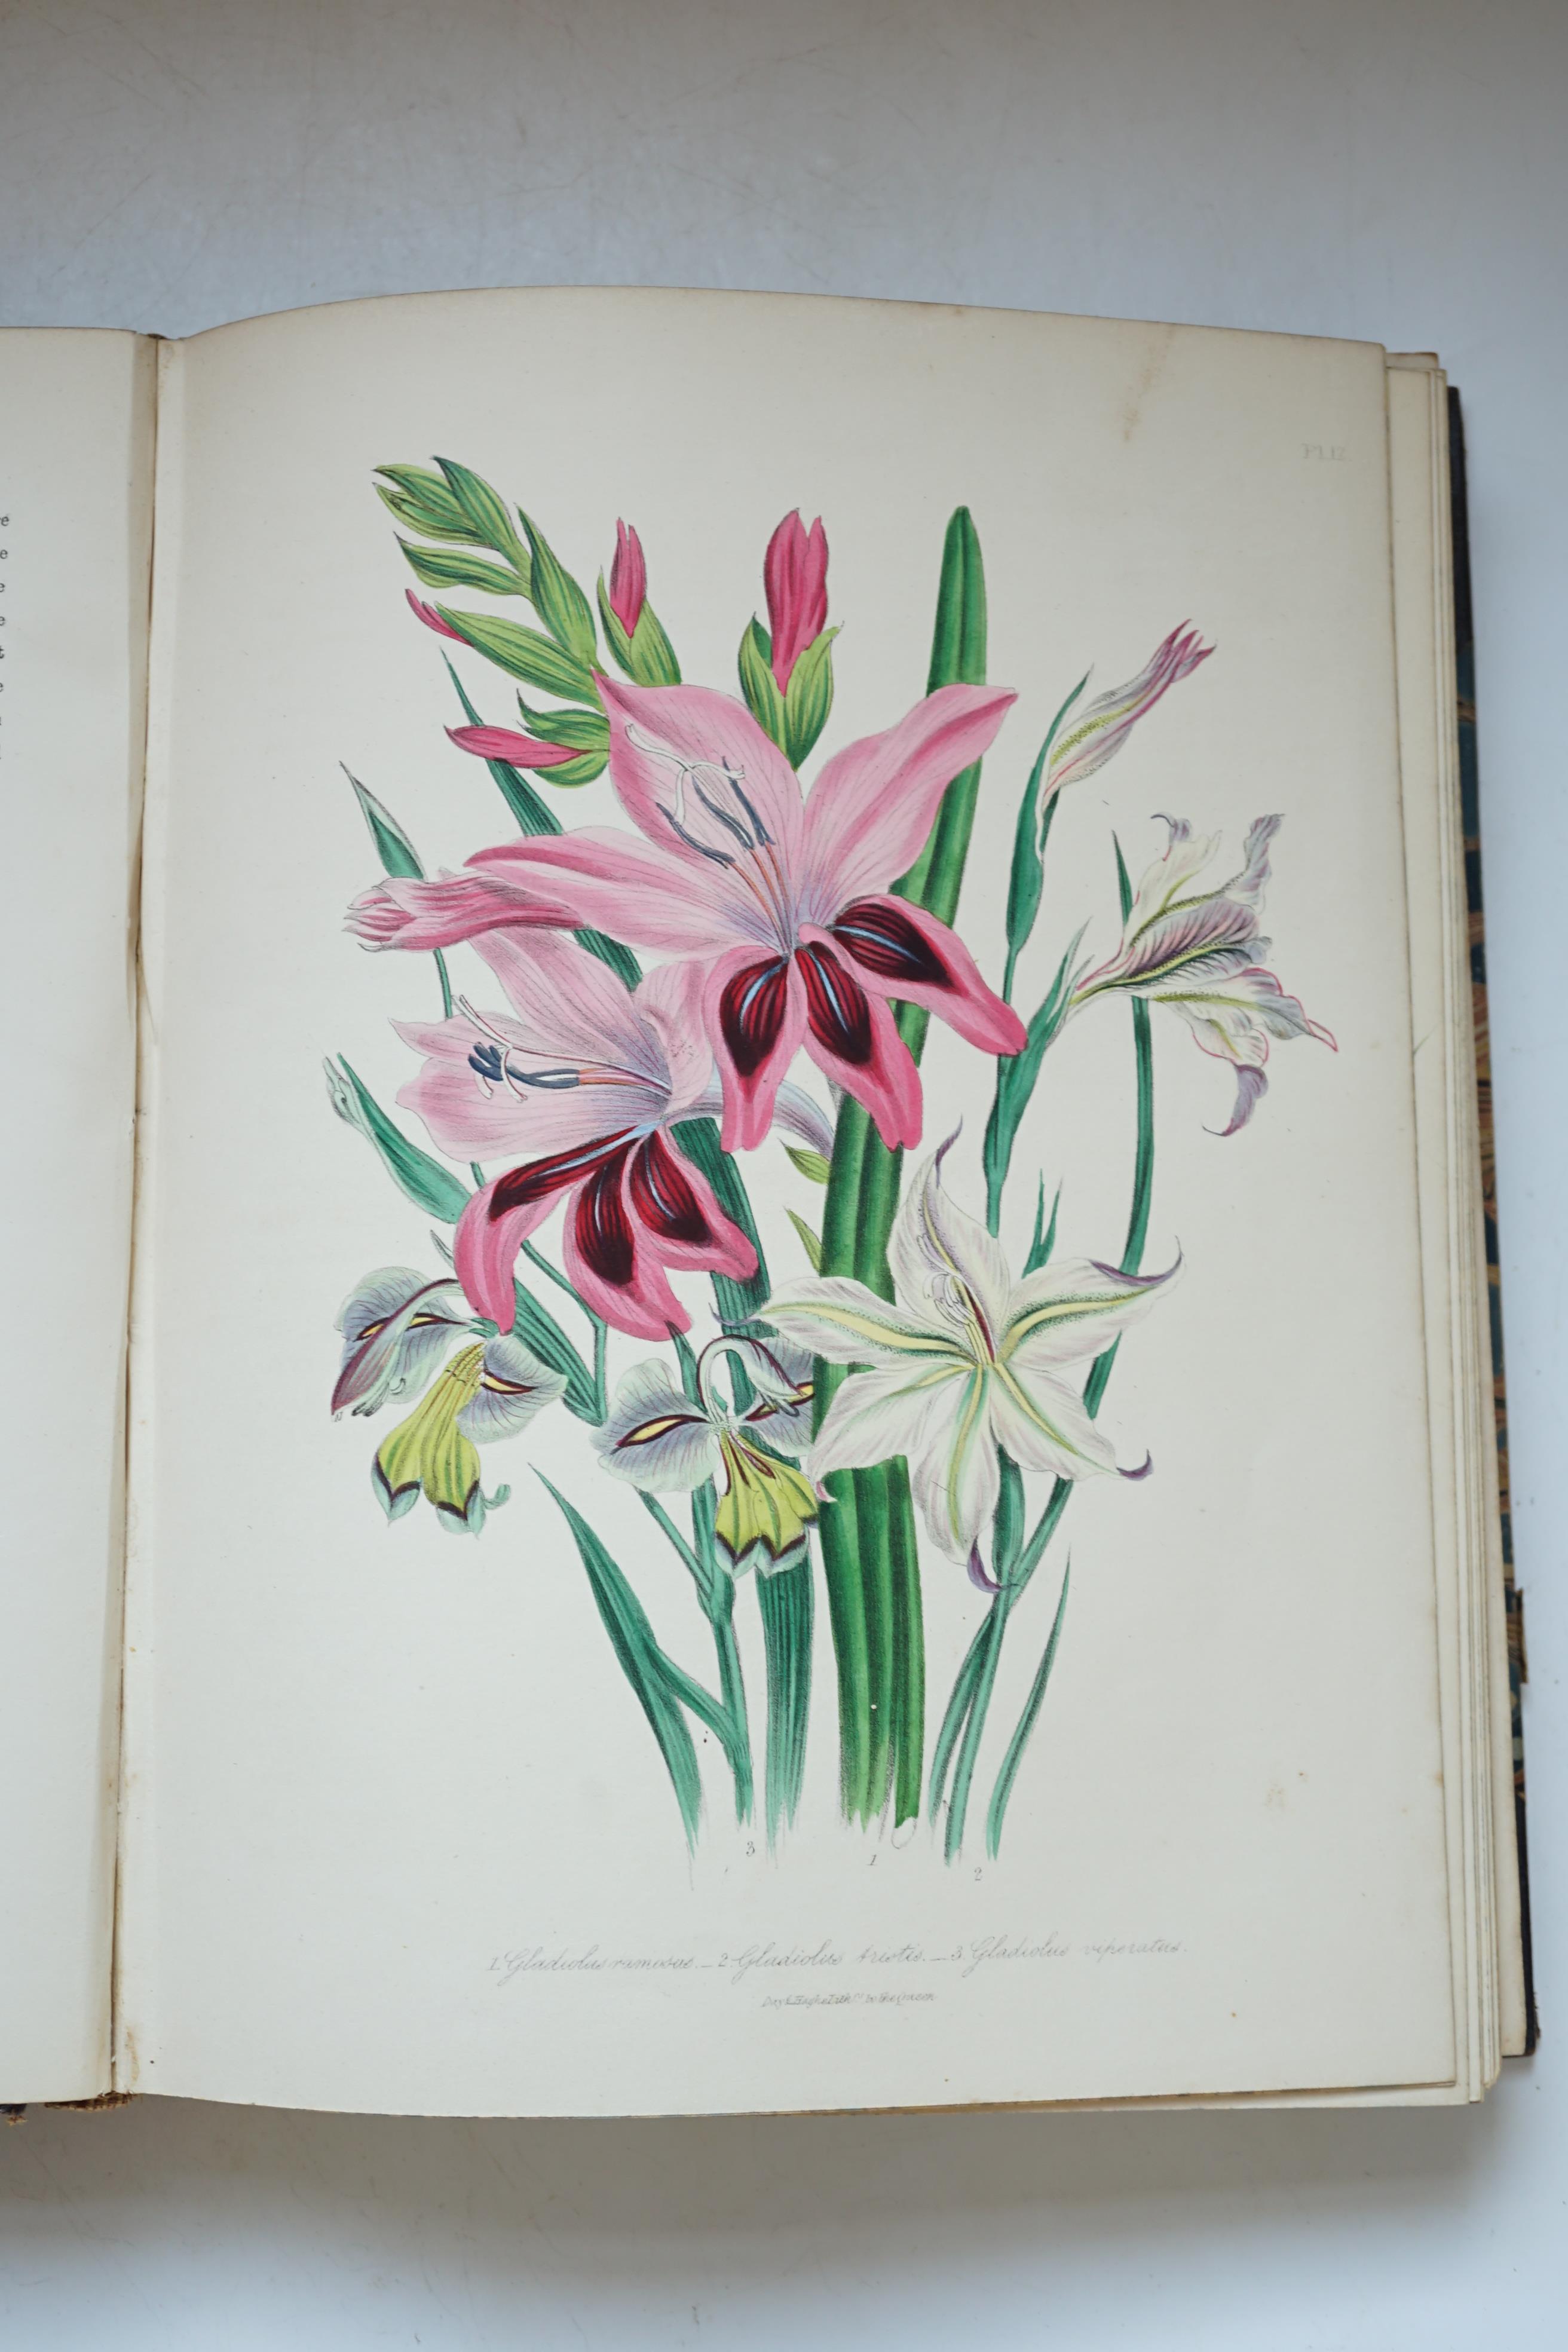 Loudon, Jane Webb - The Ladies' Flower Garden of Ornamental Bulbous Plants, 1st edition, 58 hand-coloured lithographed plates, 4to, contemporary half morocco, spine torn, with 80% loss, William Smith, London, 1841.